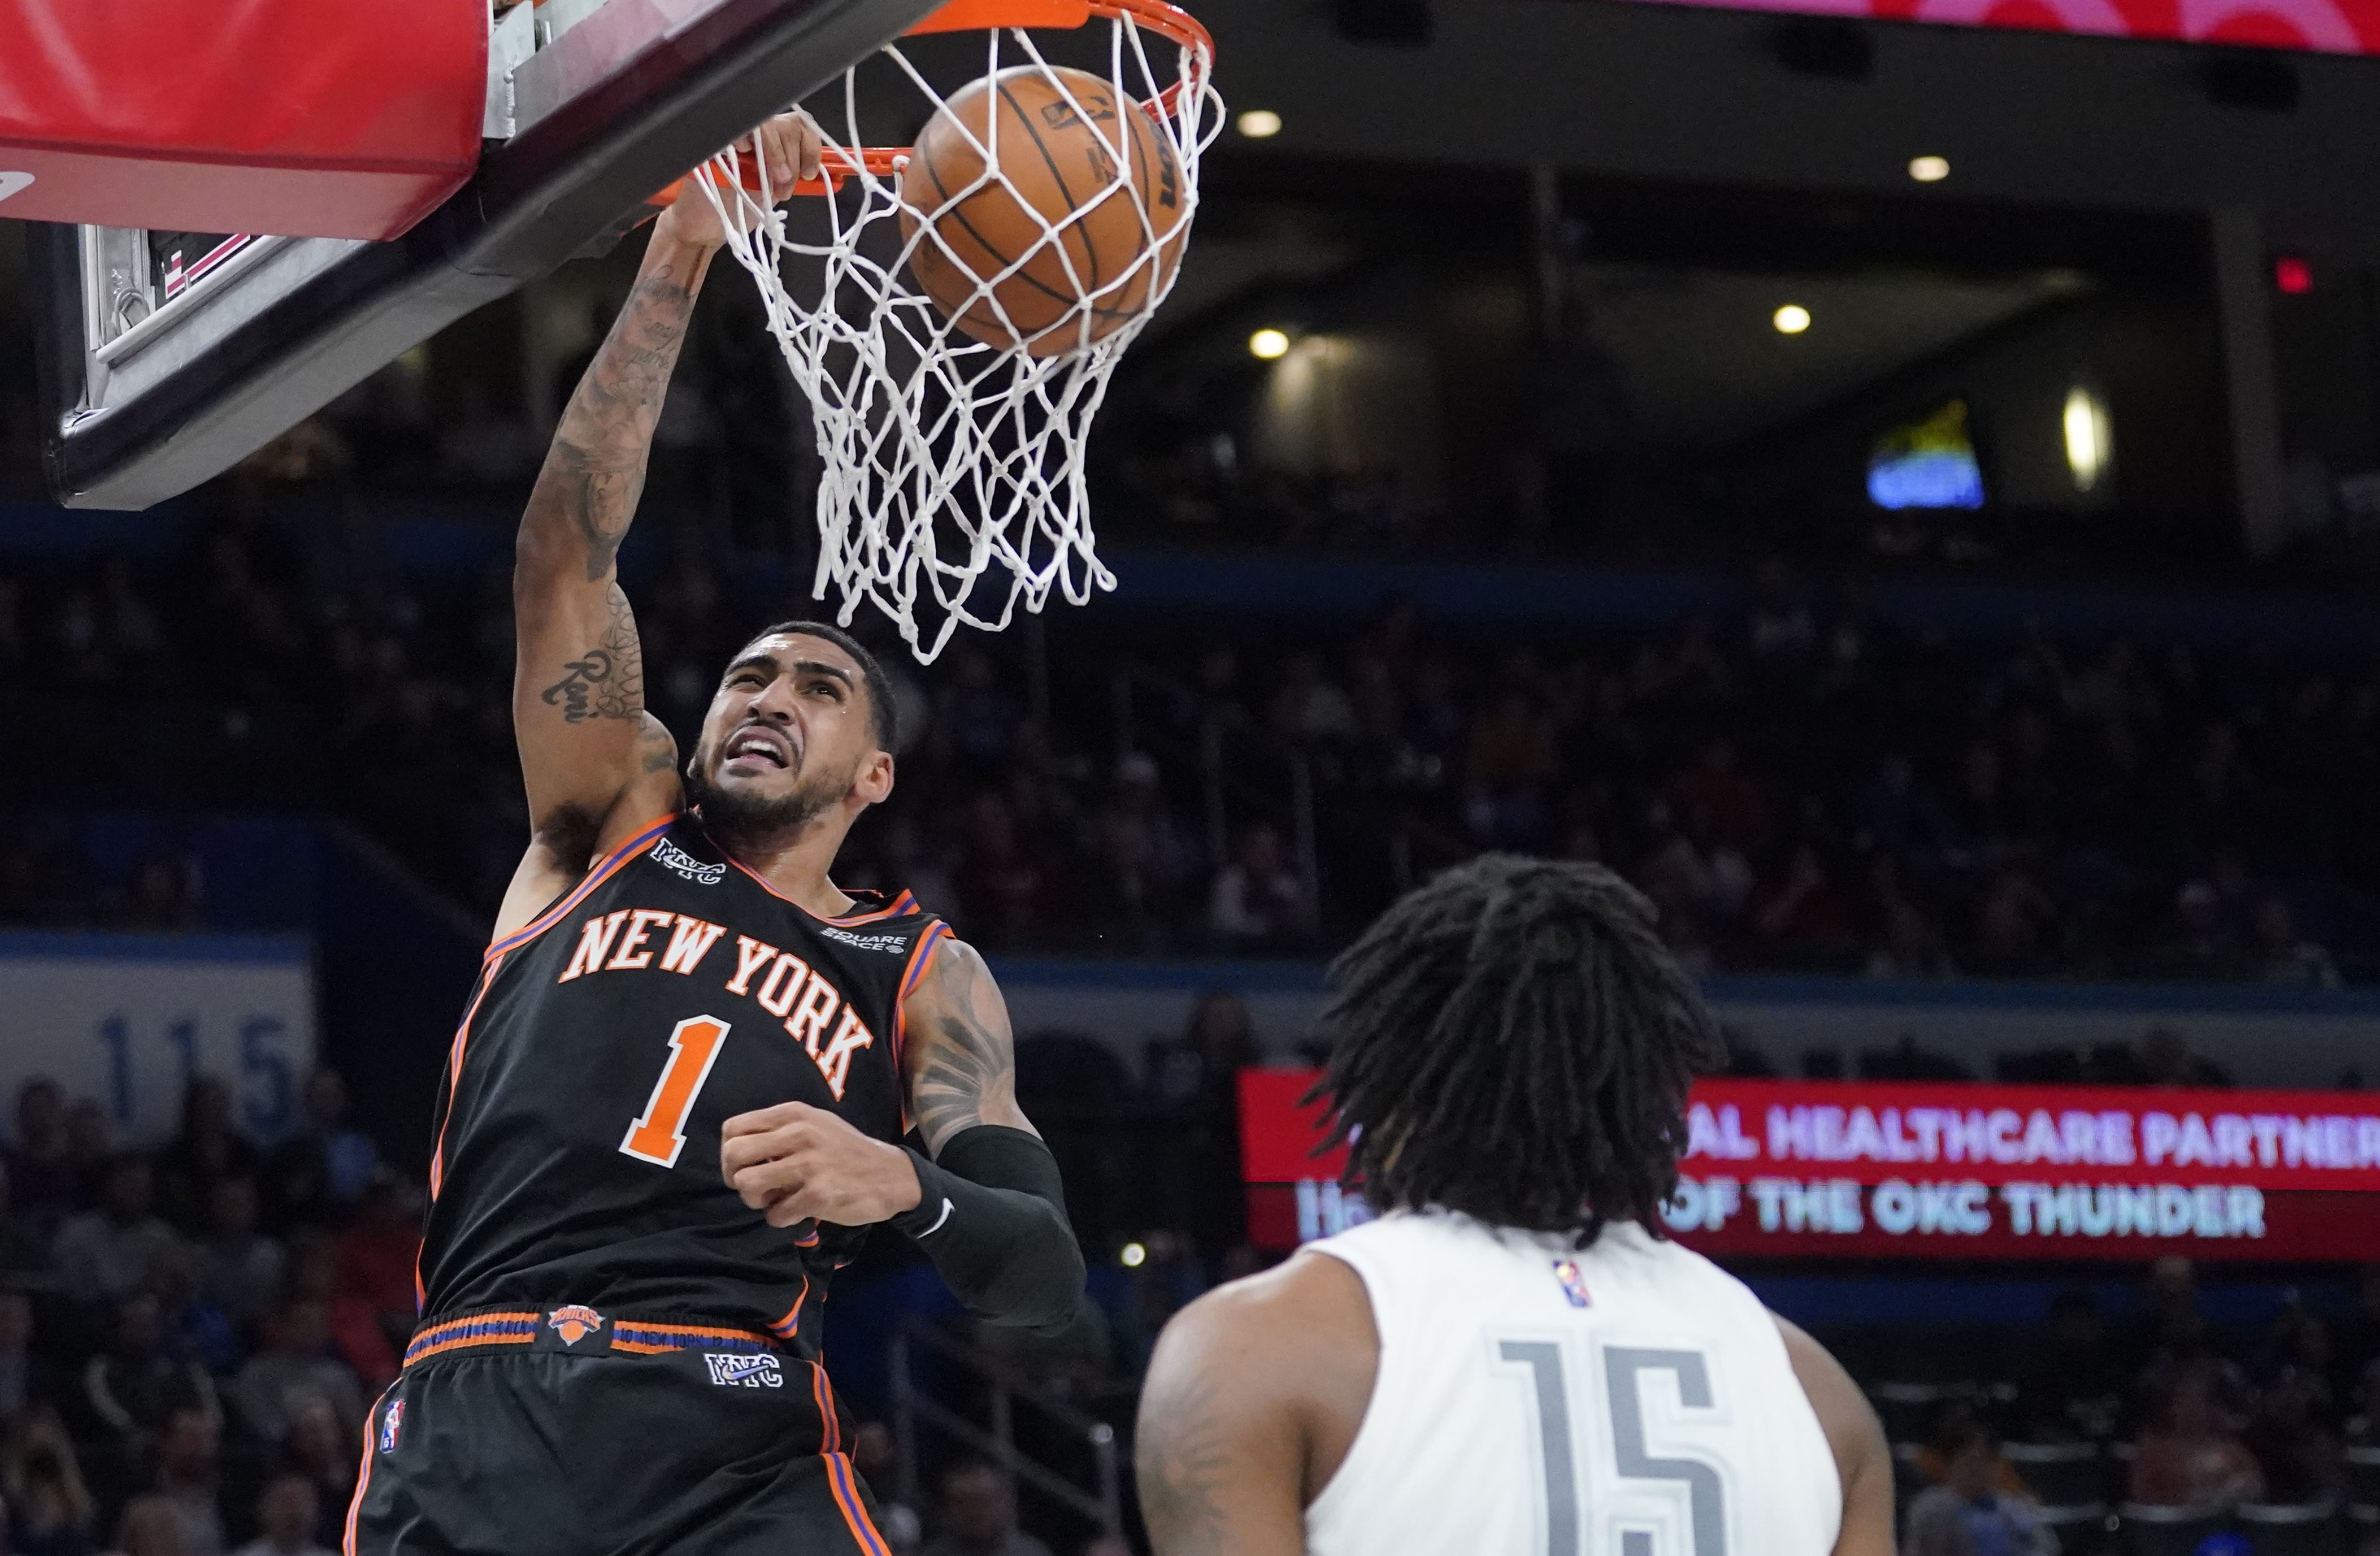 Obi Toppin, slamming one home, scored just five points in the Knicks' loss to the Thunder.